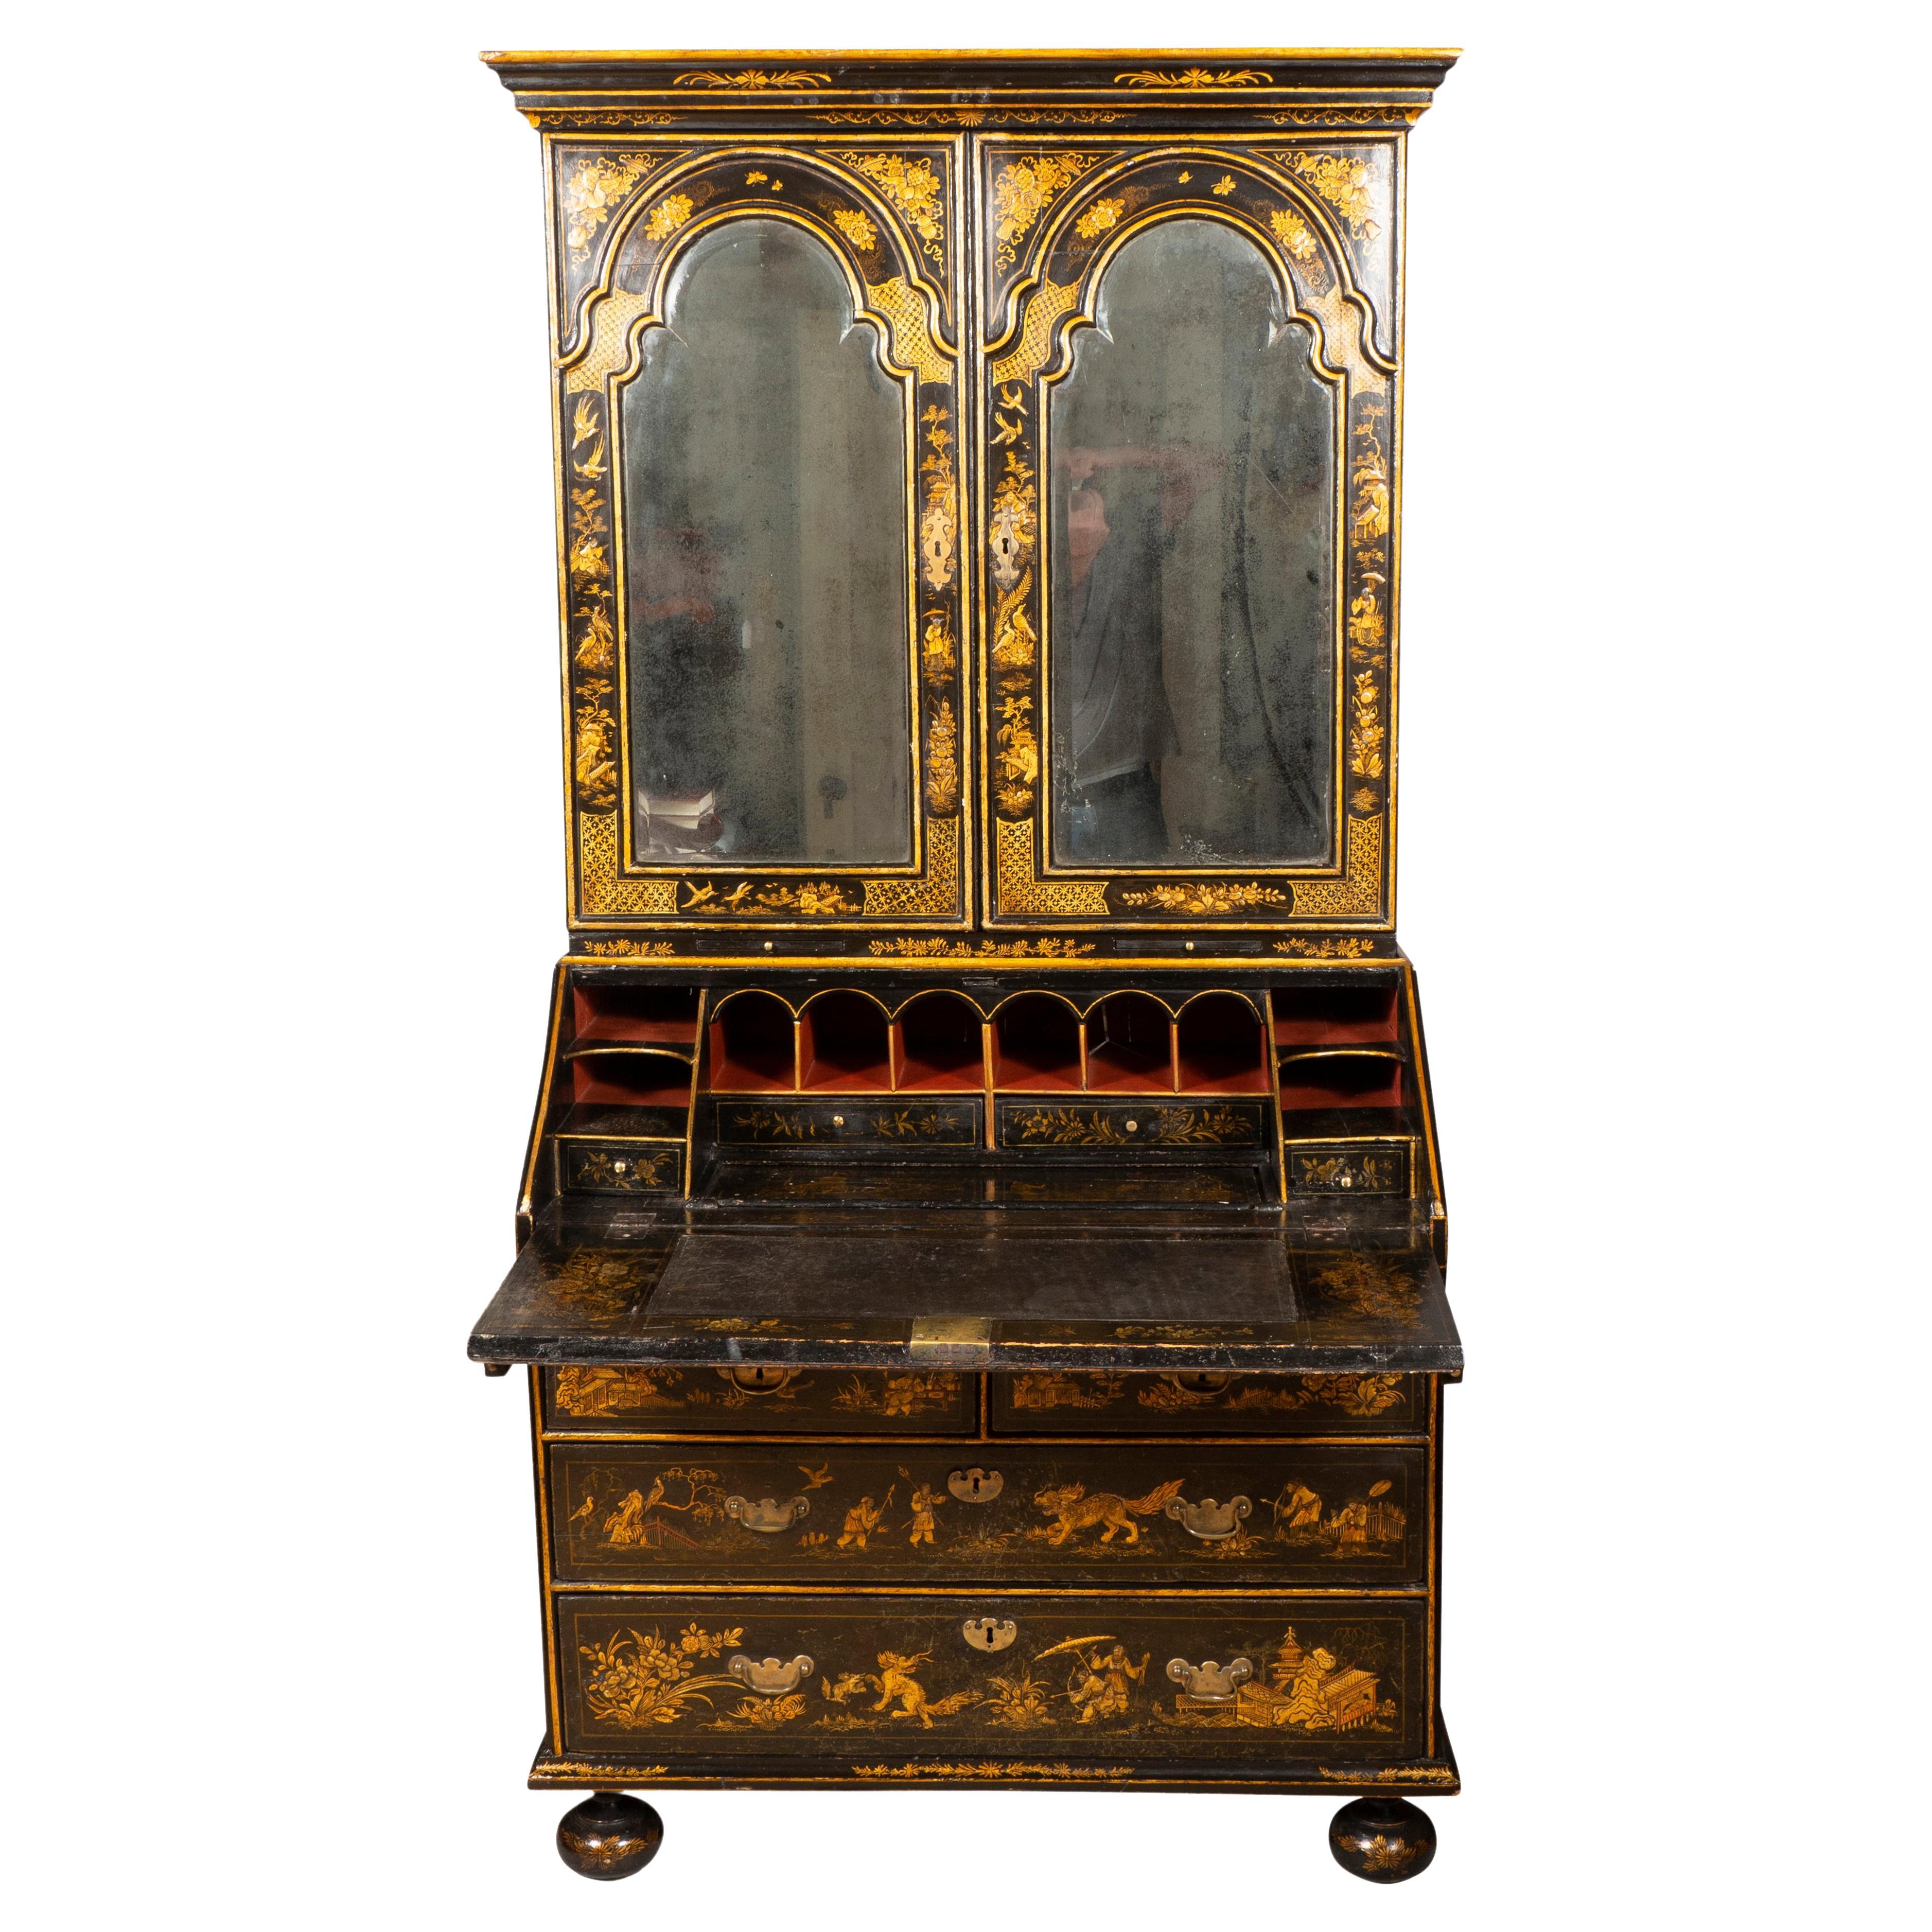 A beautiful piece reputedly purchased by the previous owner from Kentshire Antiques in New York for 185,000 in the 1980s. With flat top over a pair of beveled mirror doors enclosing shelves and cubby holes and drawers, the base with a slant lid